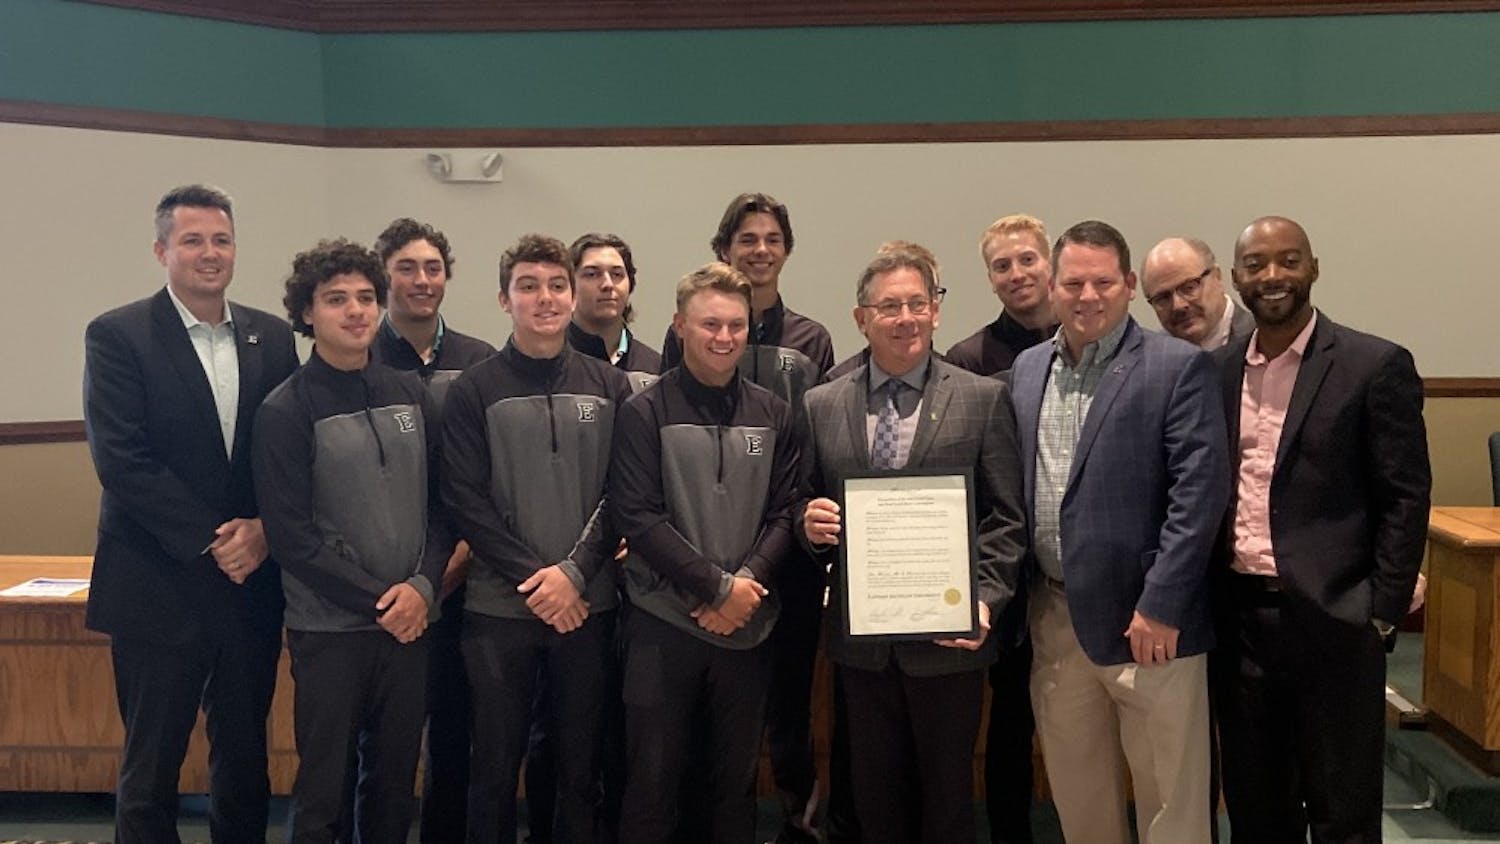 EMU men's golf presented with recognition